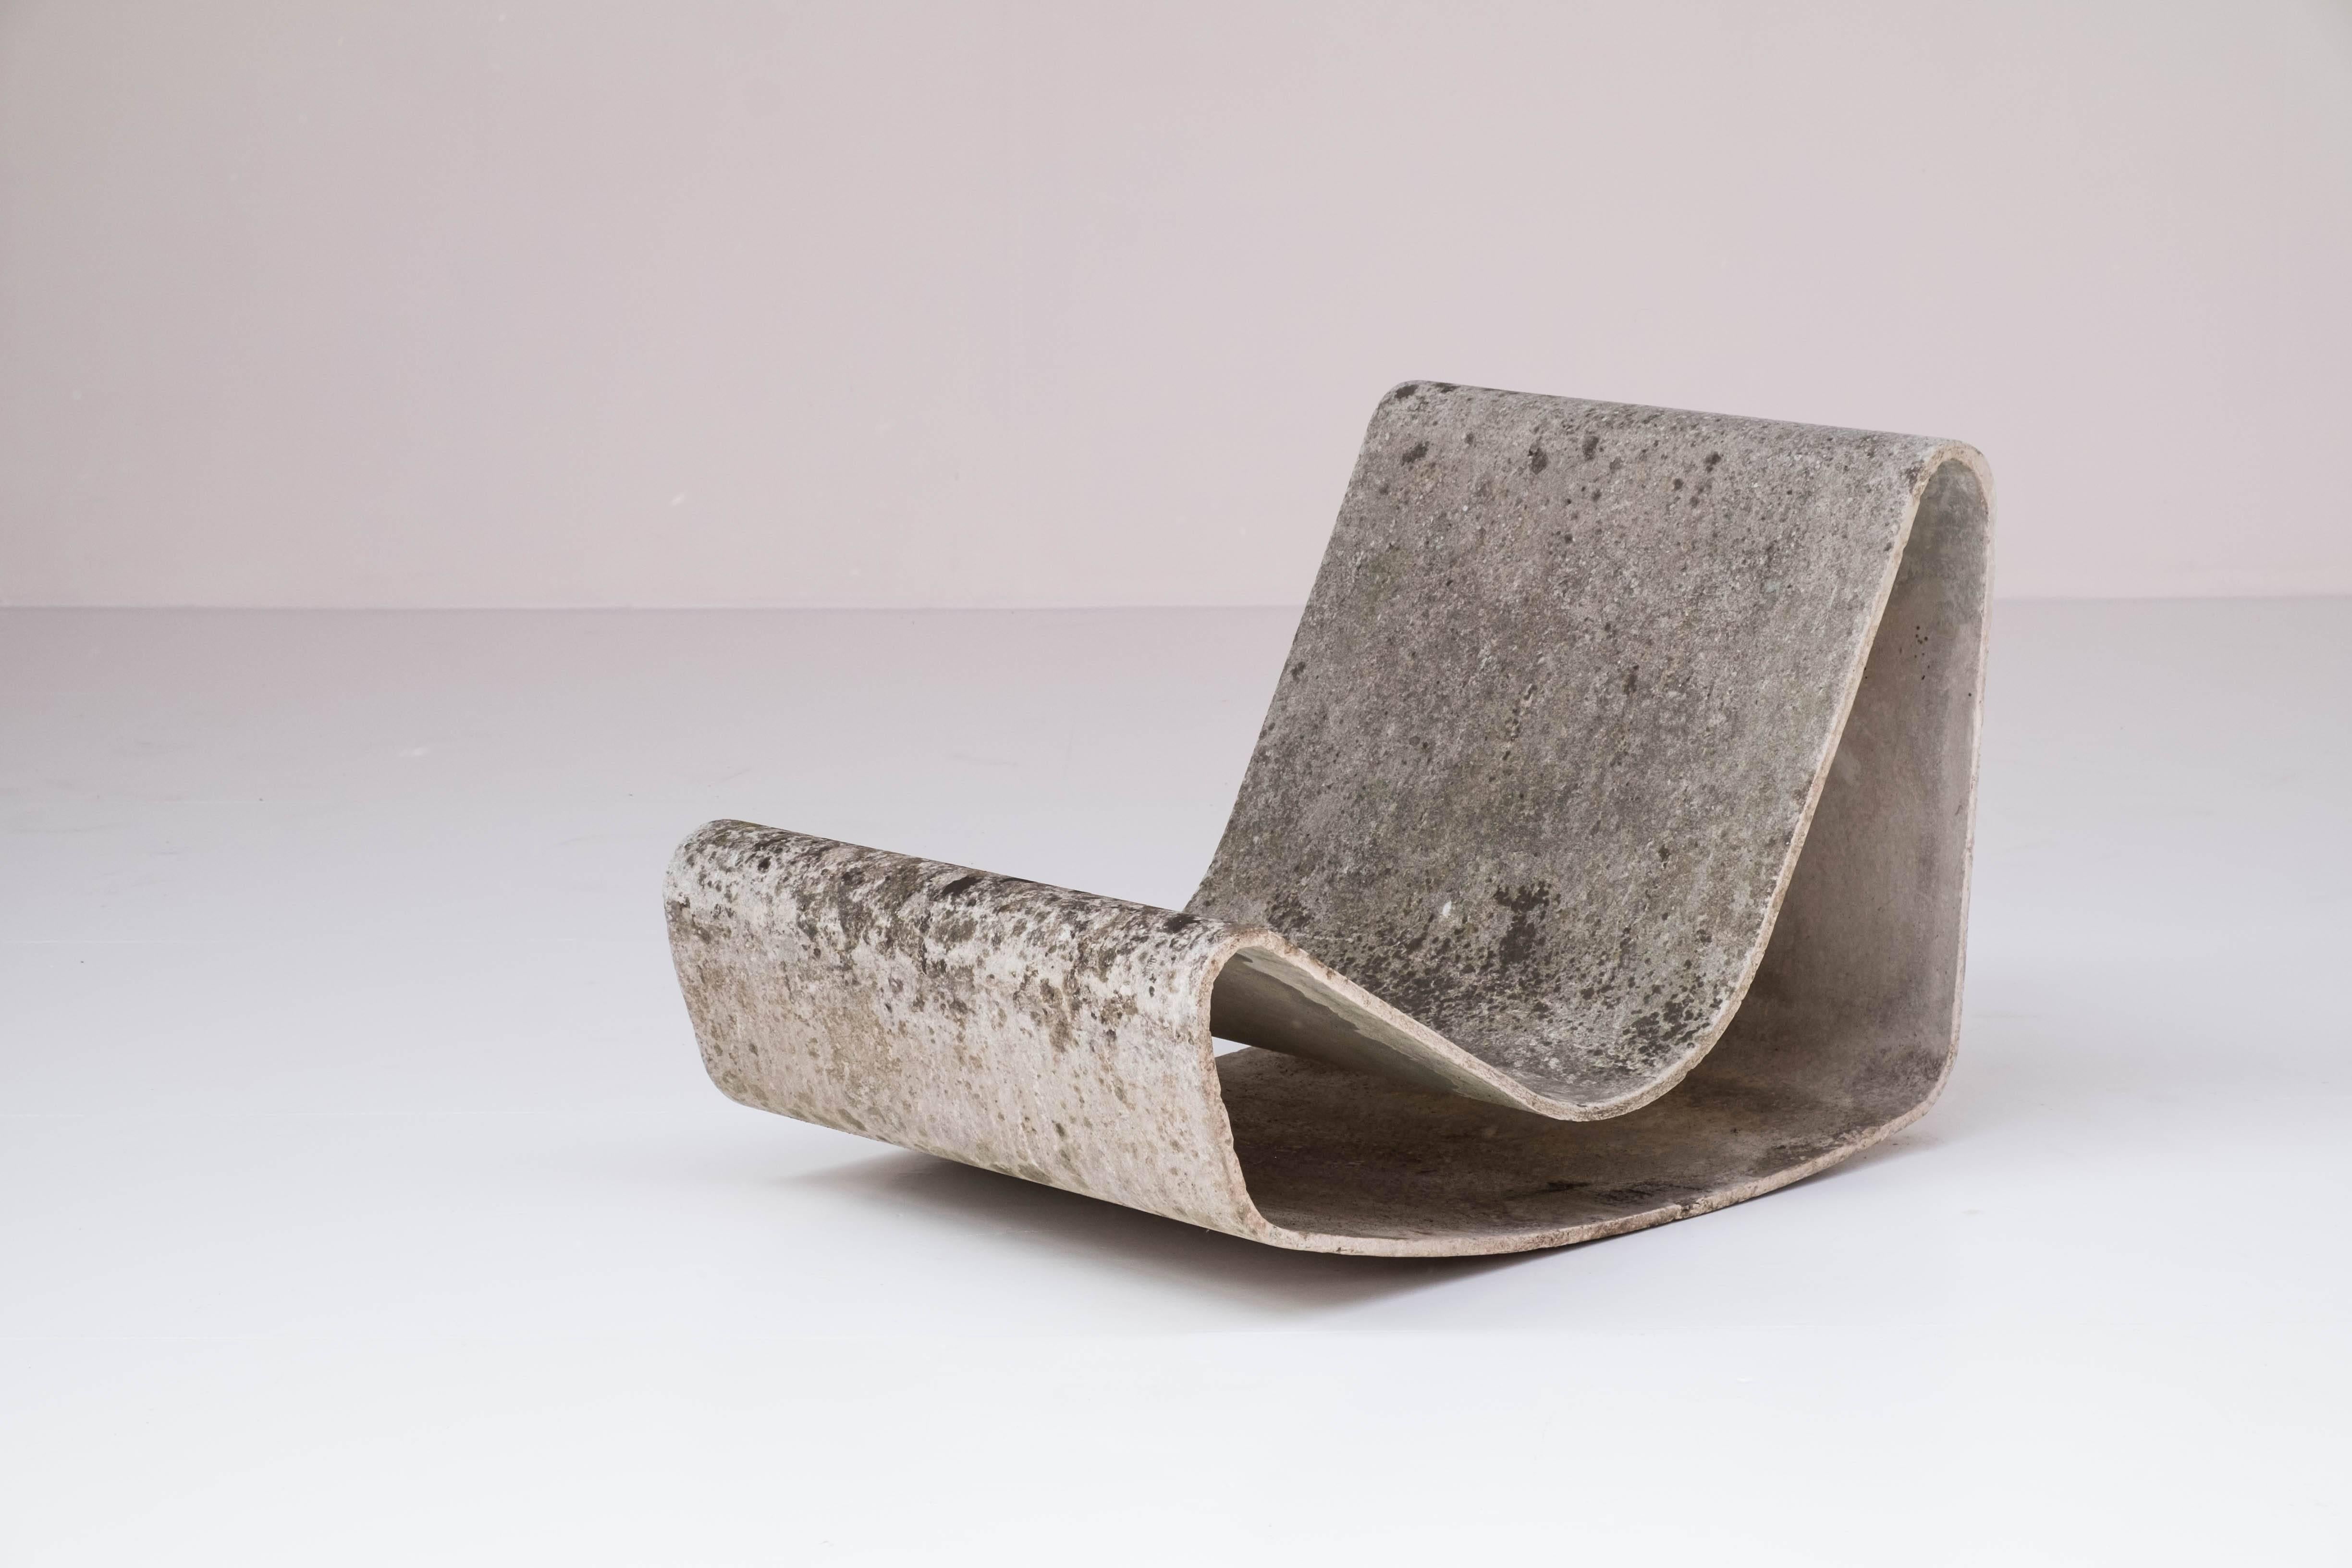 Concrete, outdoor loop chair by Swiss designer Willy Guhl produced in the 1960s. In good condition with a nice patina.